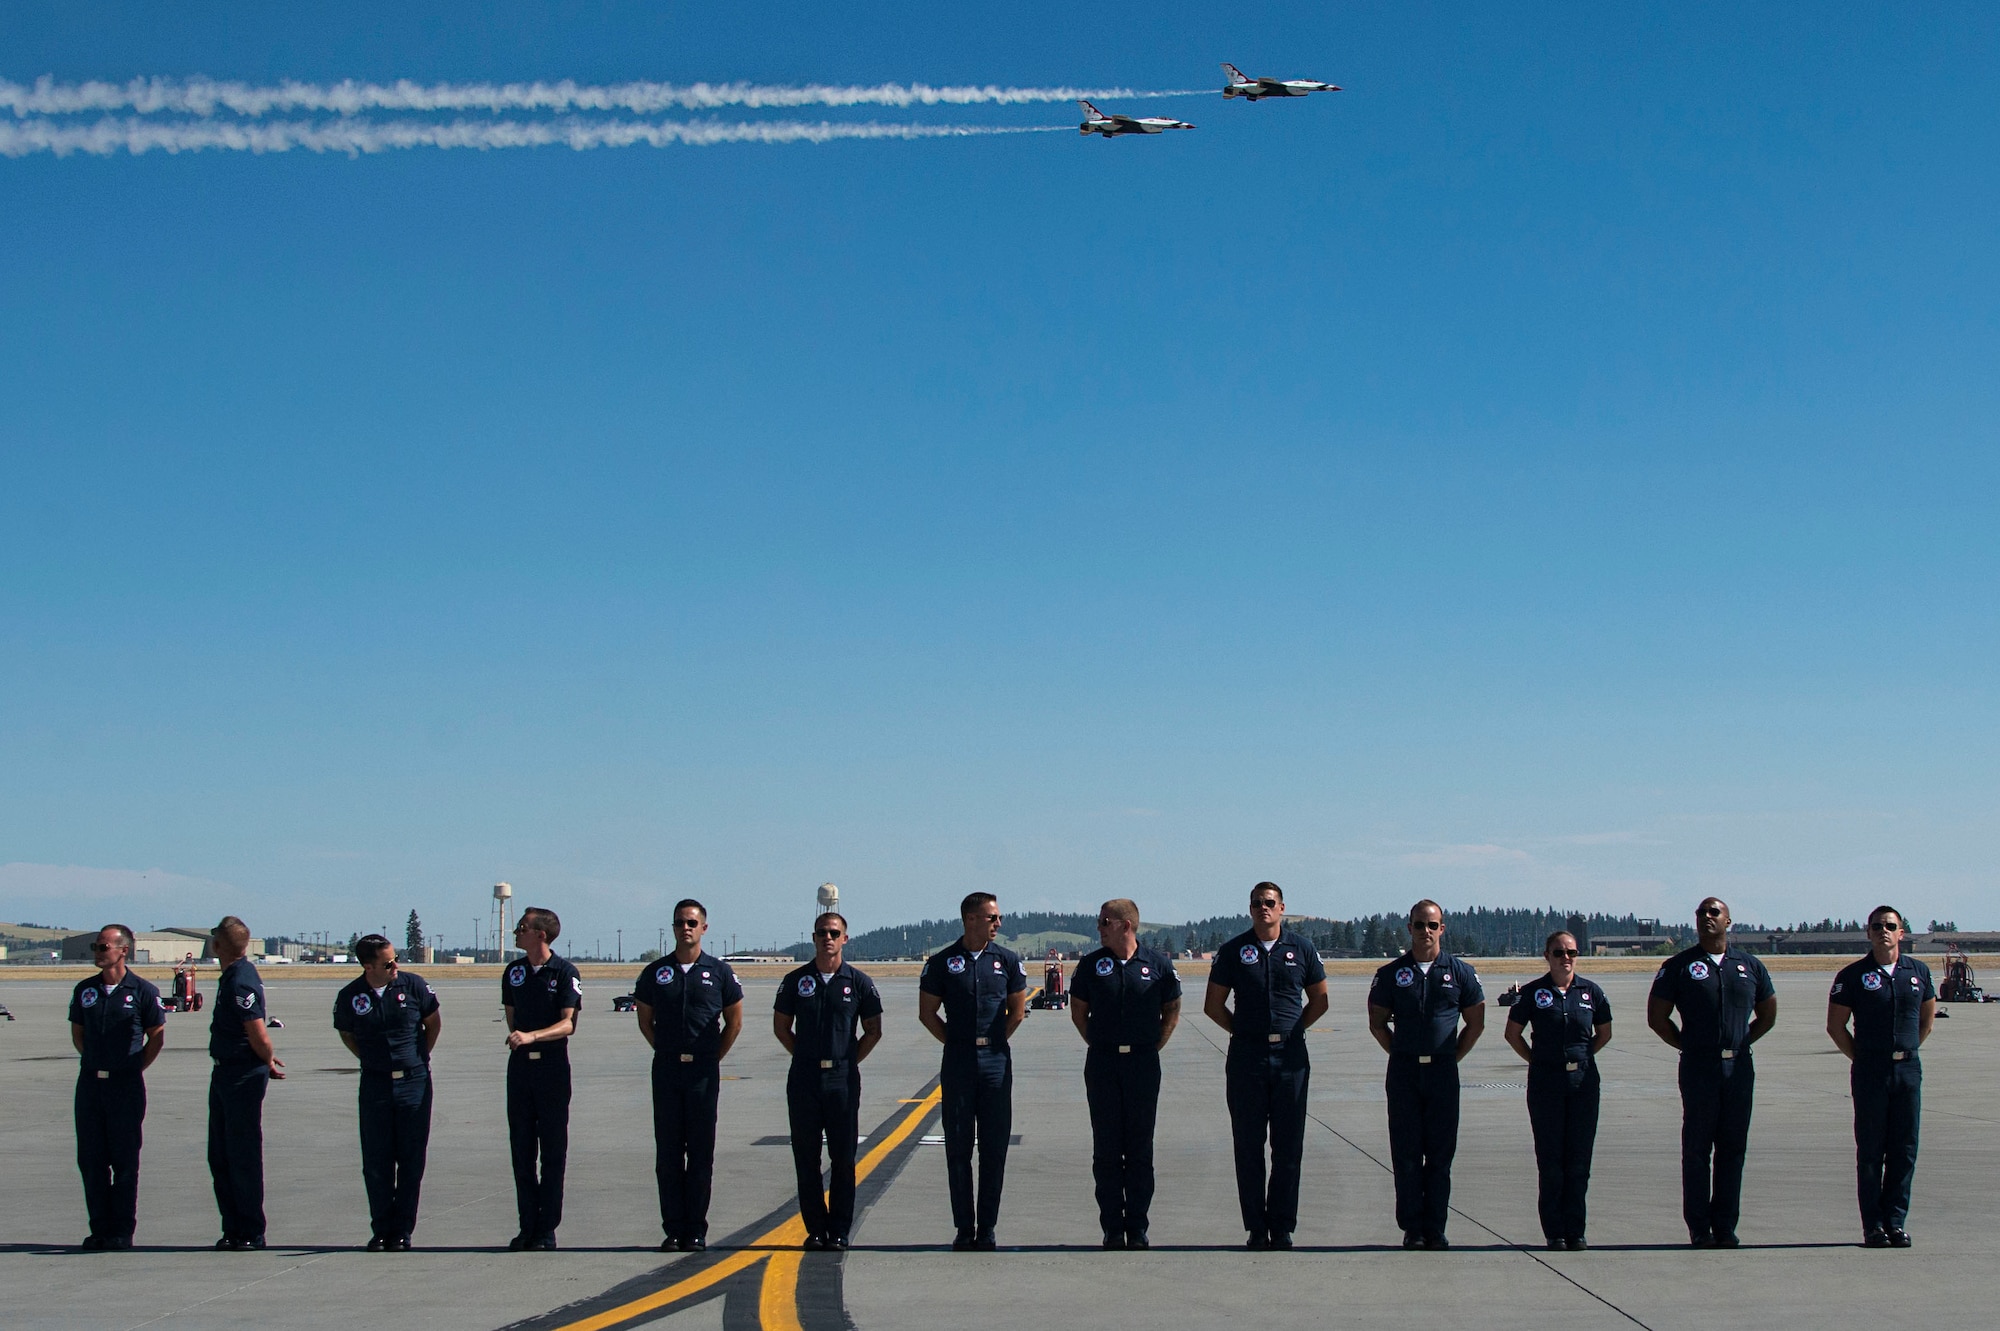 Members of the U.S. Air Force Aerial Demonstration Squadron “Thunderbirds” stand by as the Thunderbirds fly in formation during SkyFest 2017 Air Show and Open House at Fairchild Air Force Base, Washington, July 28, 2017. SkyFest hosted more than 15 types of aircraft and static displays and more than 10 flying performers. (U.S. Air Force photo/Senior Airman Janelle Patiño)